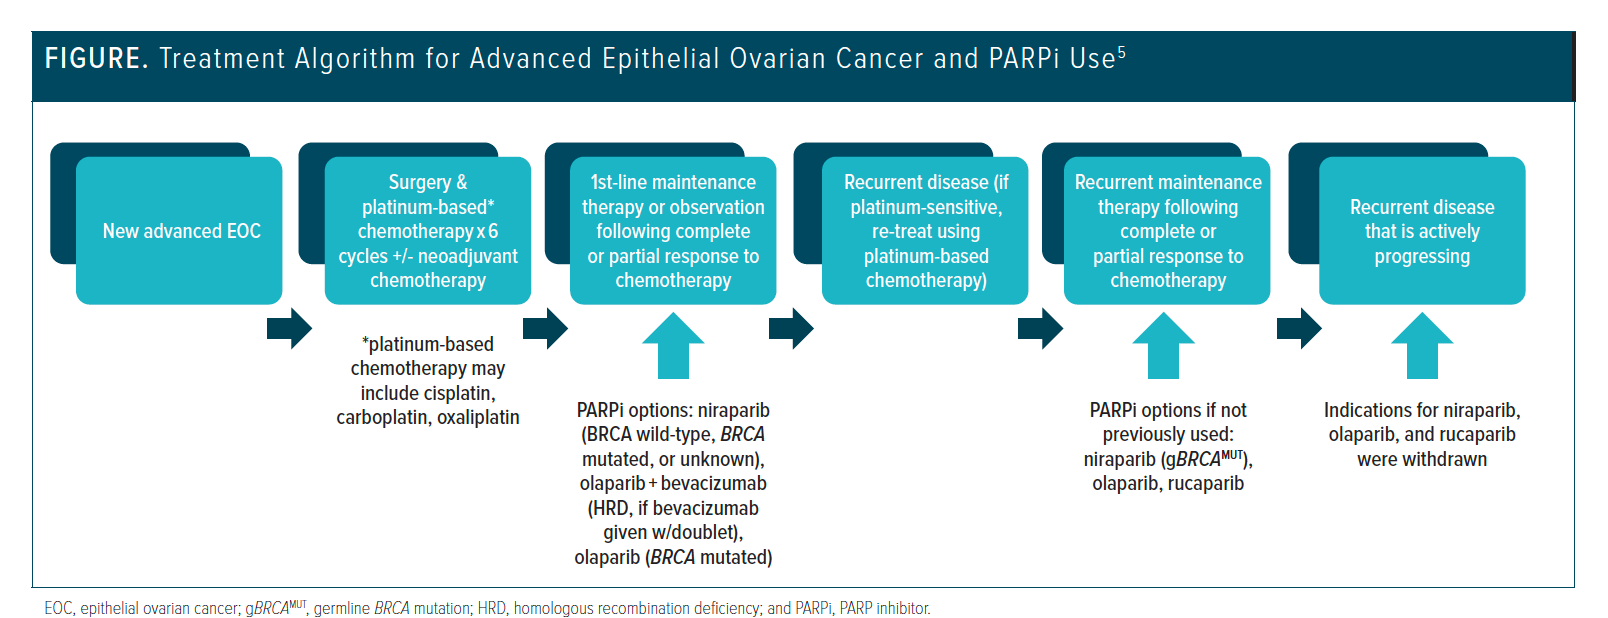 Clinical Insights Into Advancements in Epithelial Ovarian Cancer Treatment